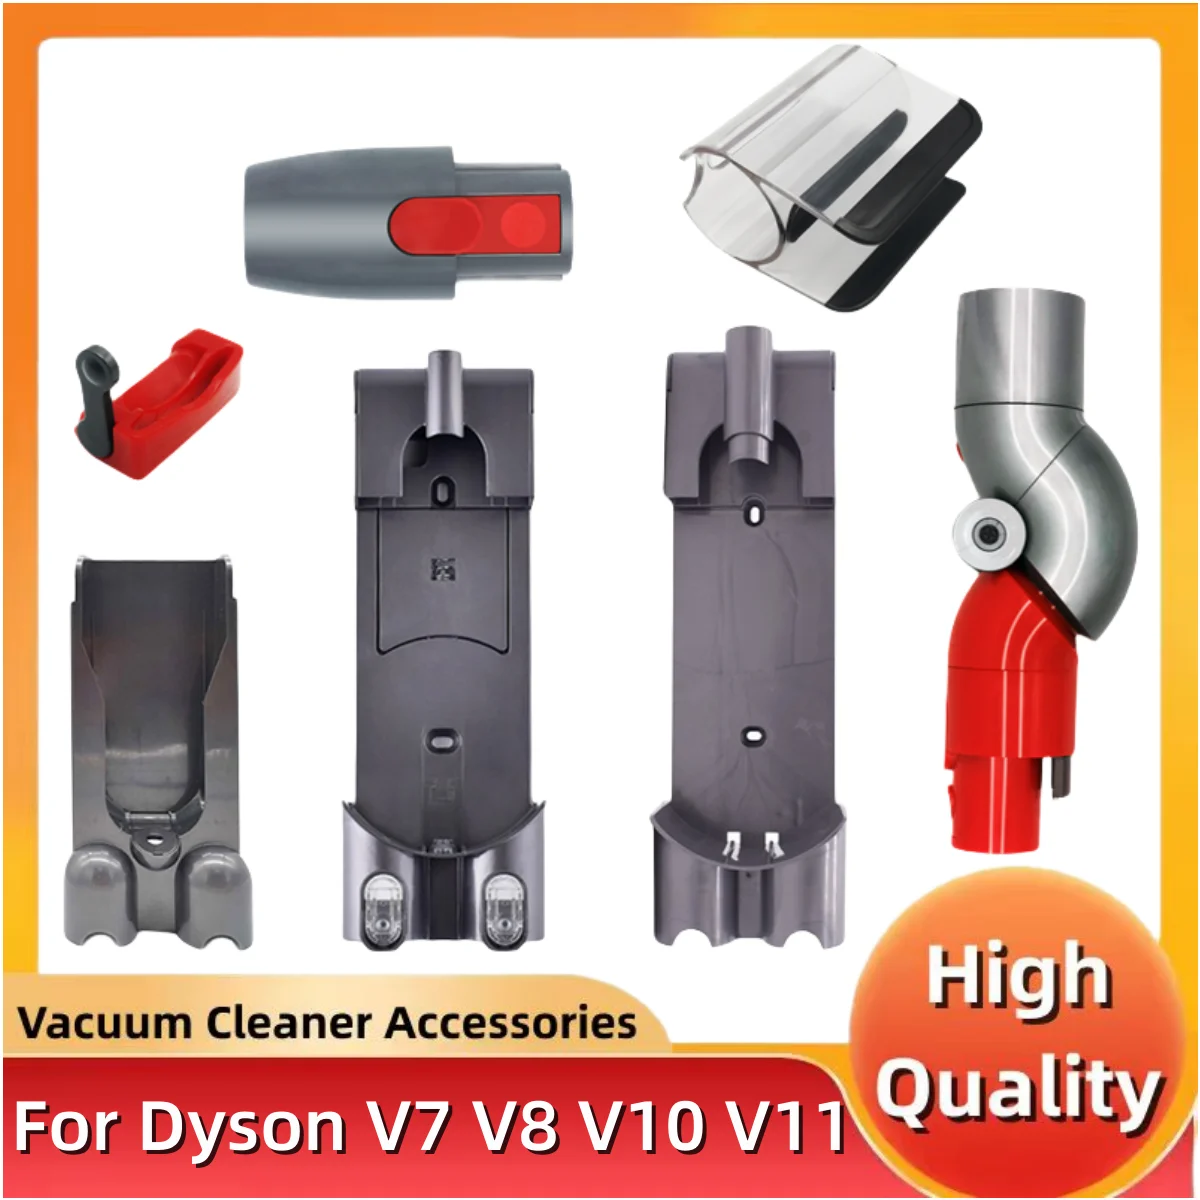 Adaptor for Dyson V7 V8 V10 V11 Quick Release Low Reach Adaptor 970790-01 Vacuum Cleaner Accessories Household Cleaning Tools